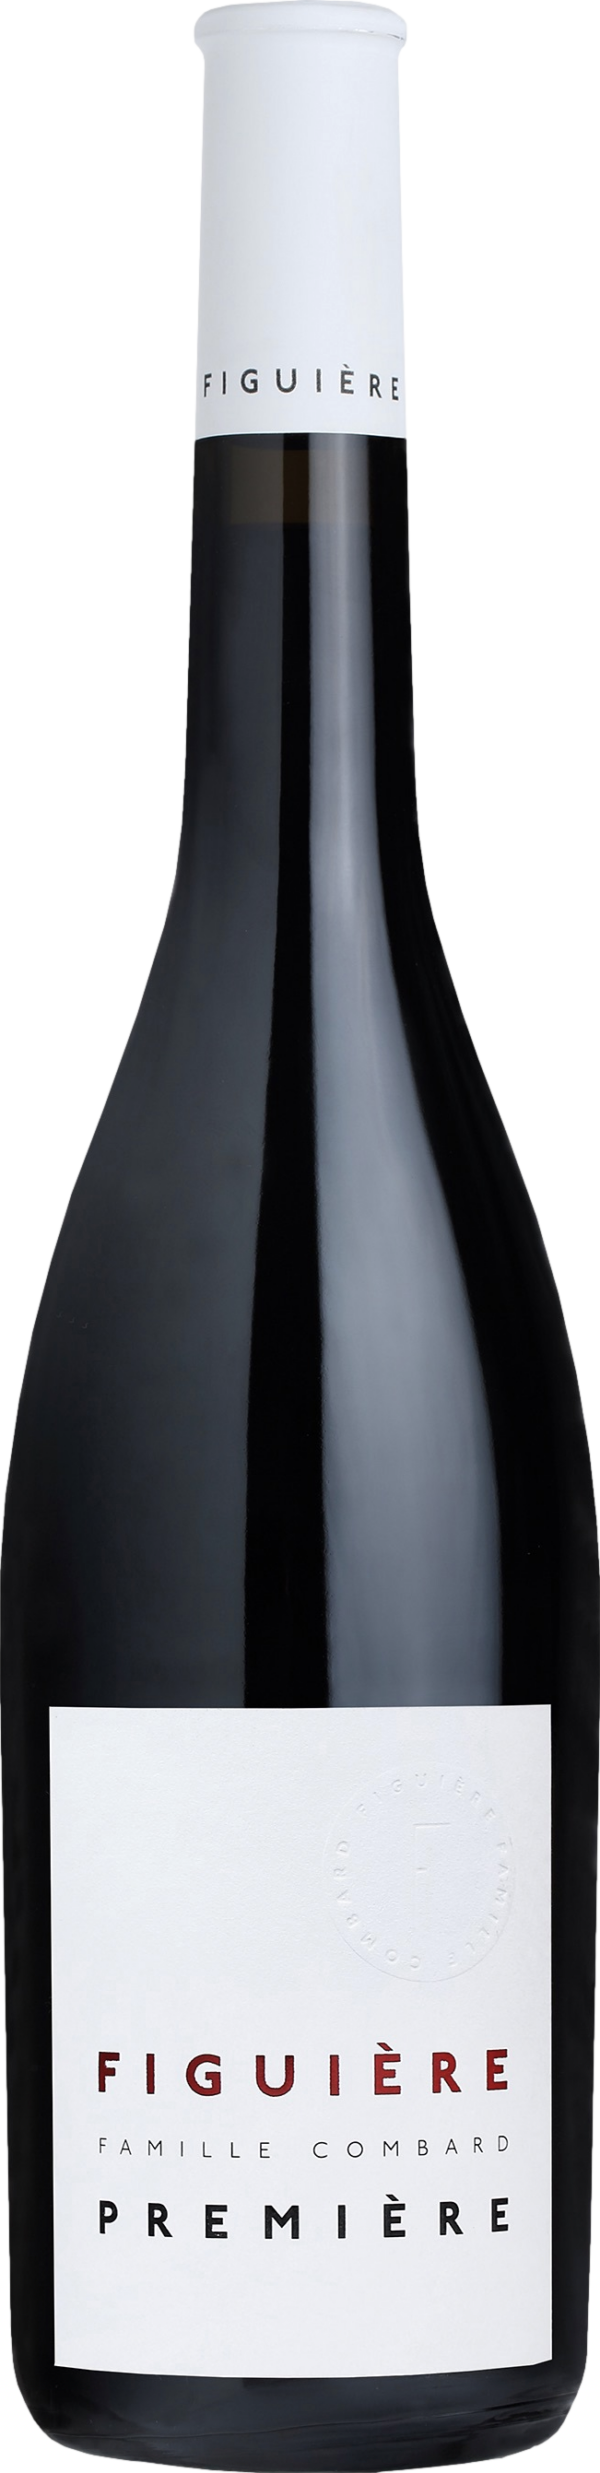 Product image of Figuiere Premiere de Figuiere Red 2020 from 8wines